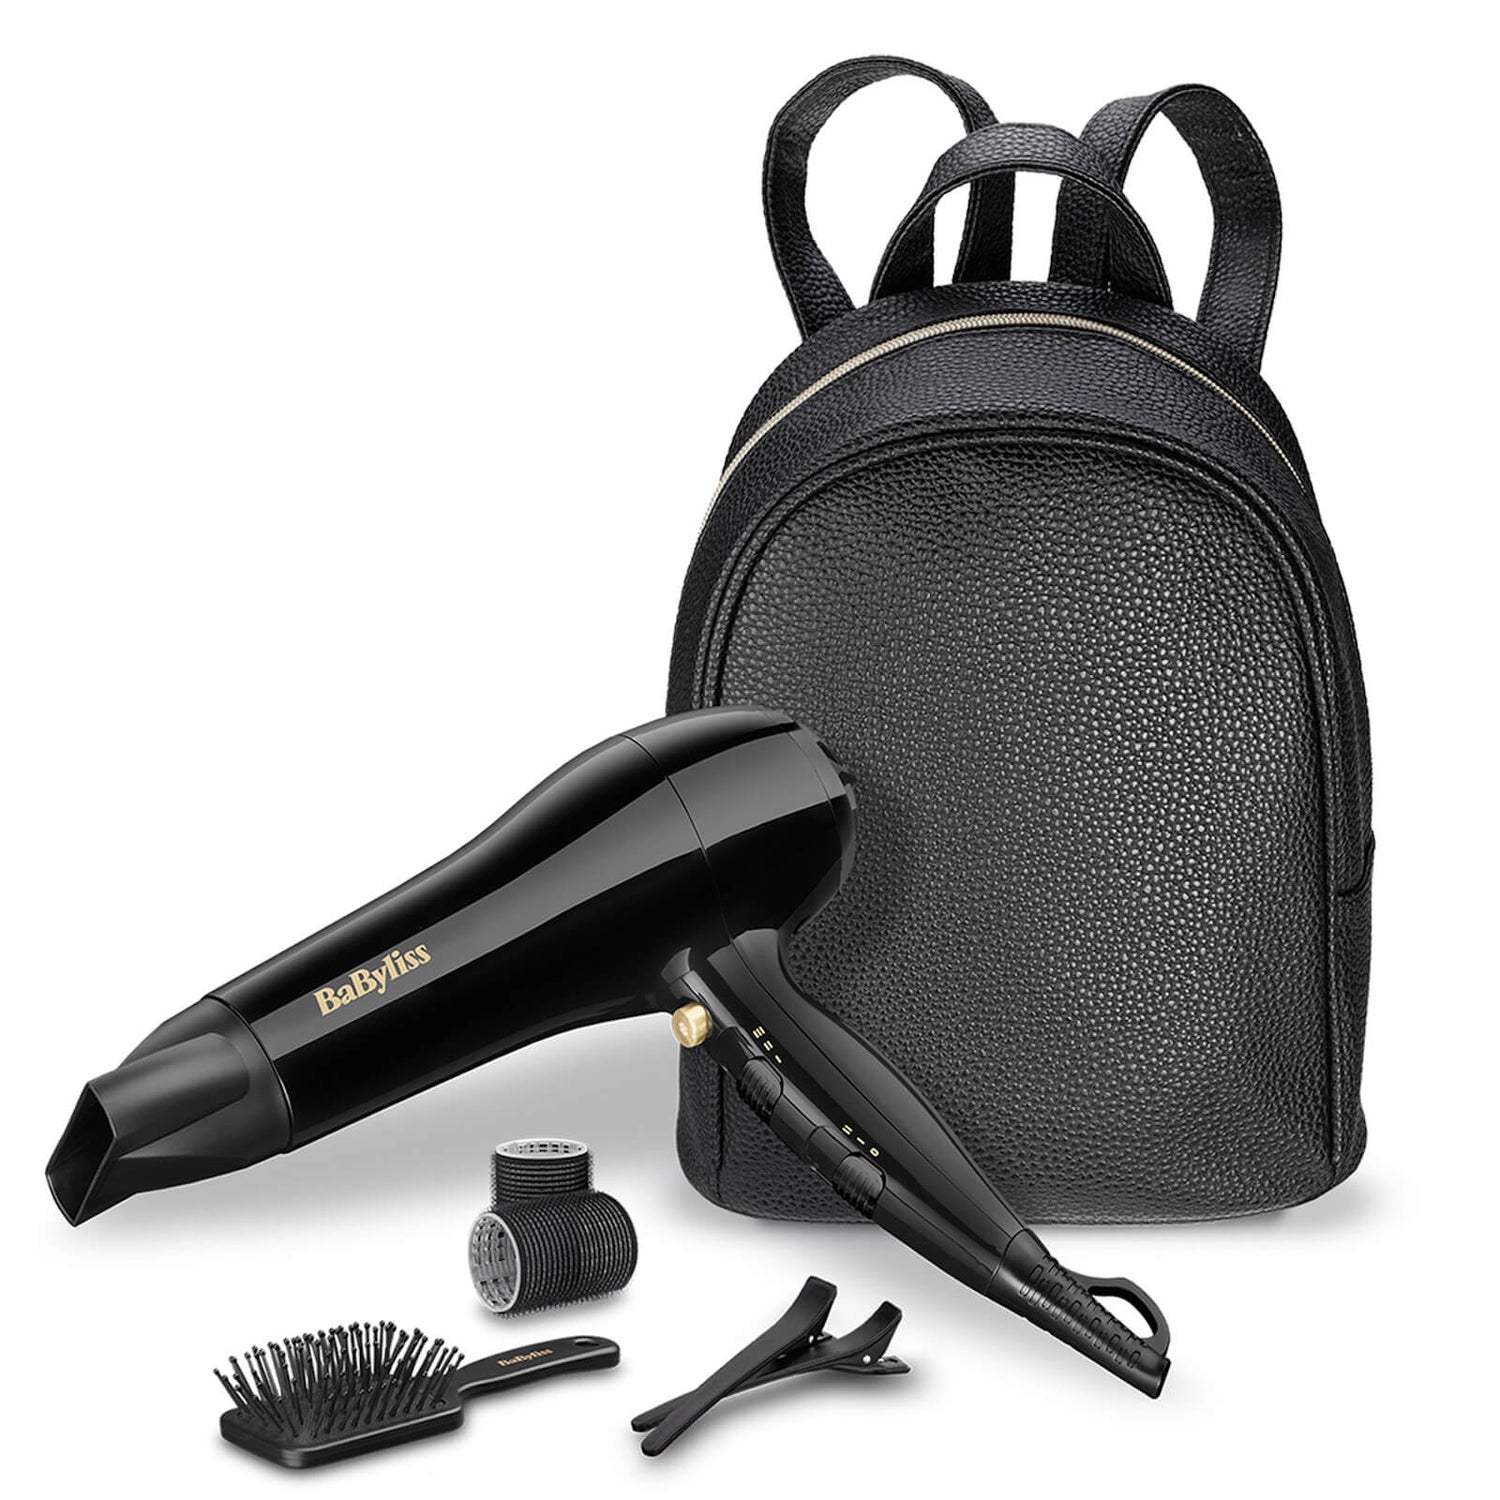 BaByliss Freedom Collection Dryer Gift Set